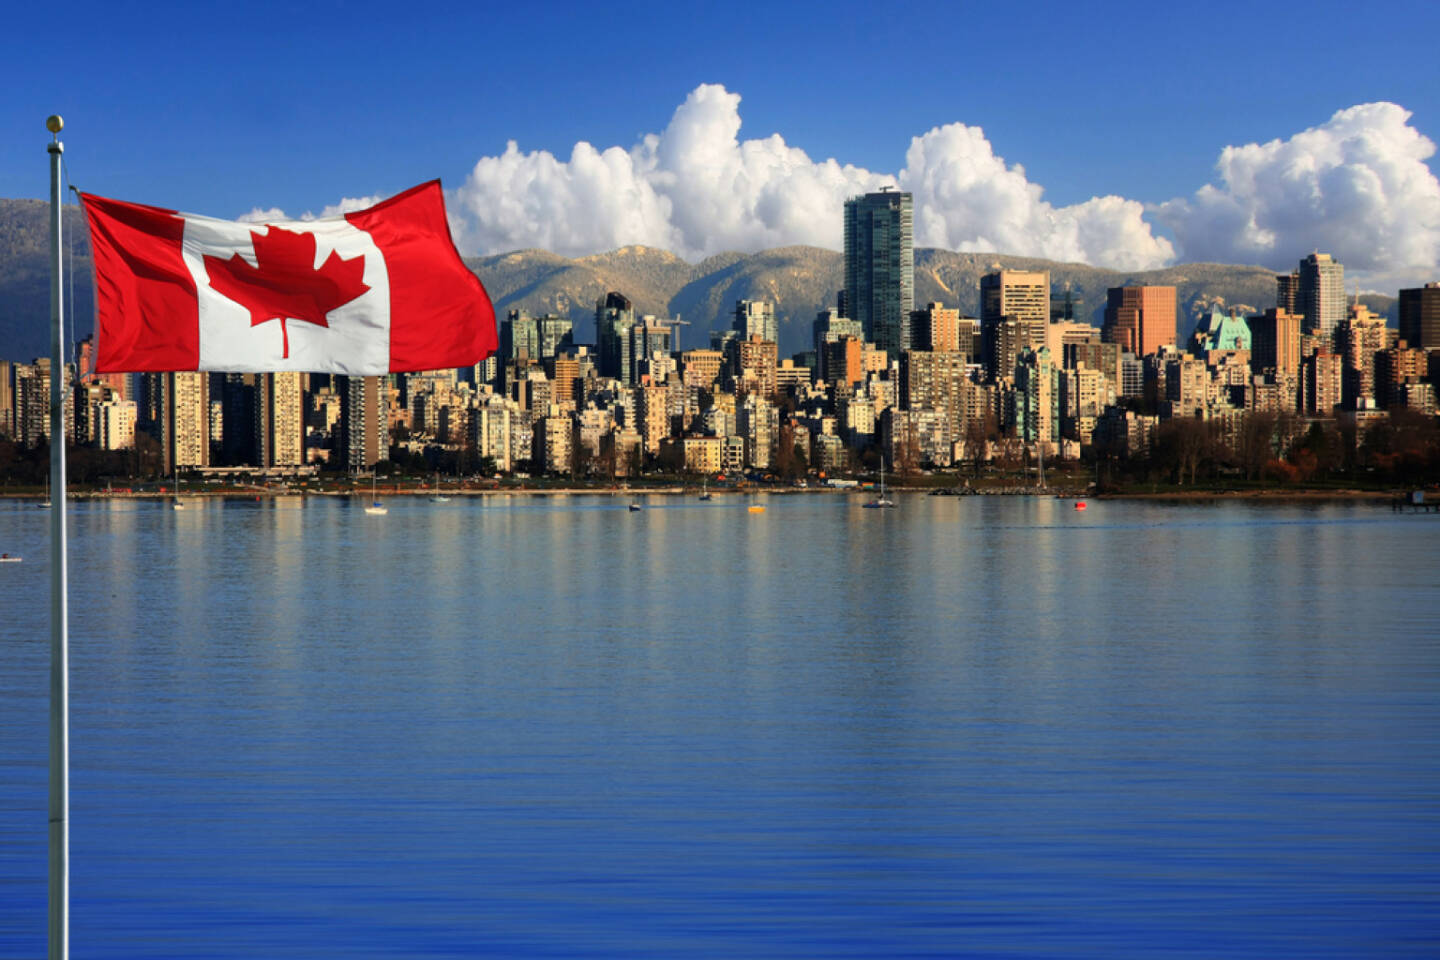 Vancouver, British Columbia, Kanada, Flagge, Fahne, http://www.shutterstock.com/de/pic-119379478/stock-photo-canadian-flag-in-front-of-the-beautiful-city-of-vancouver-canada.html 